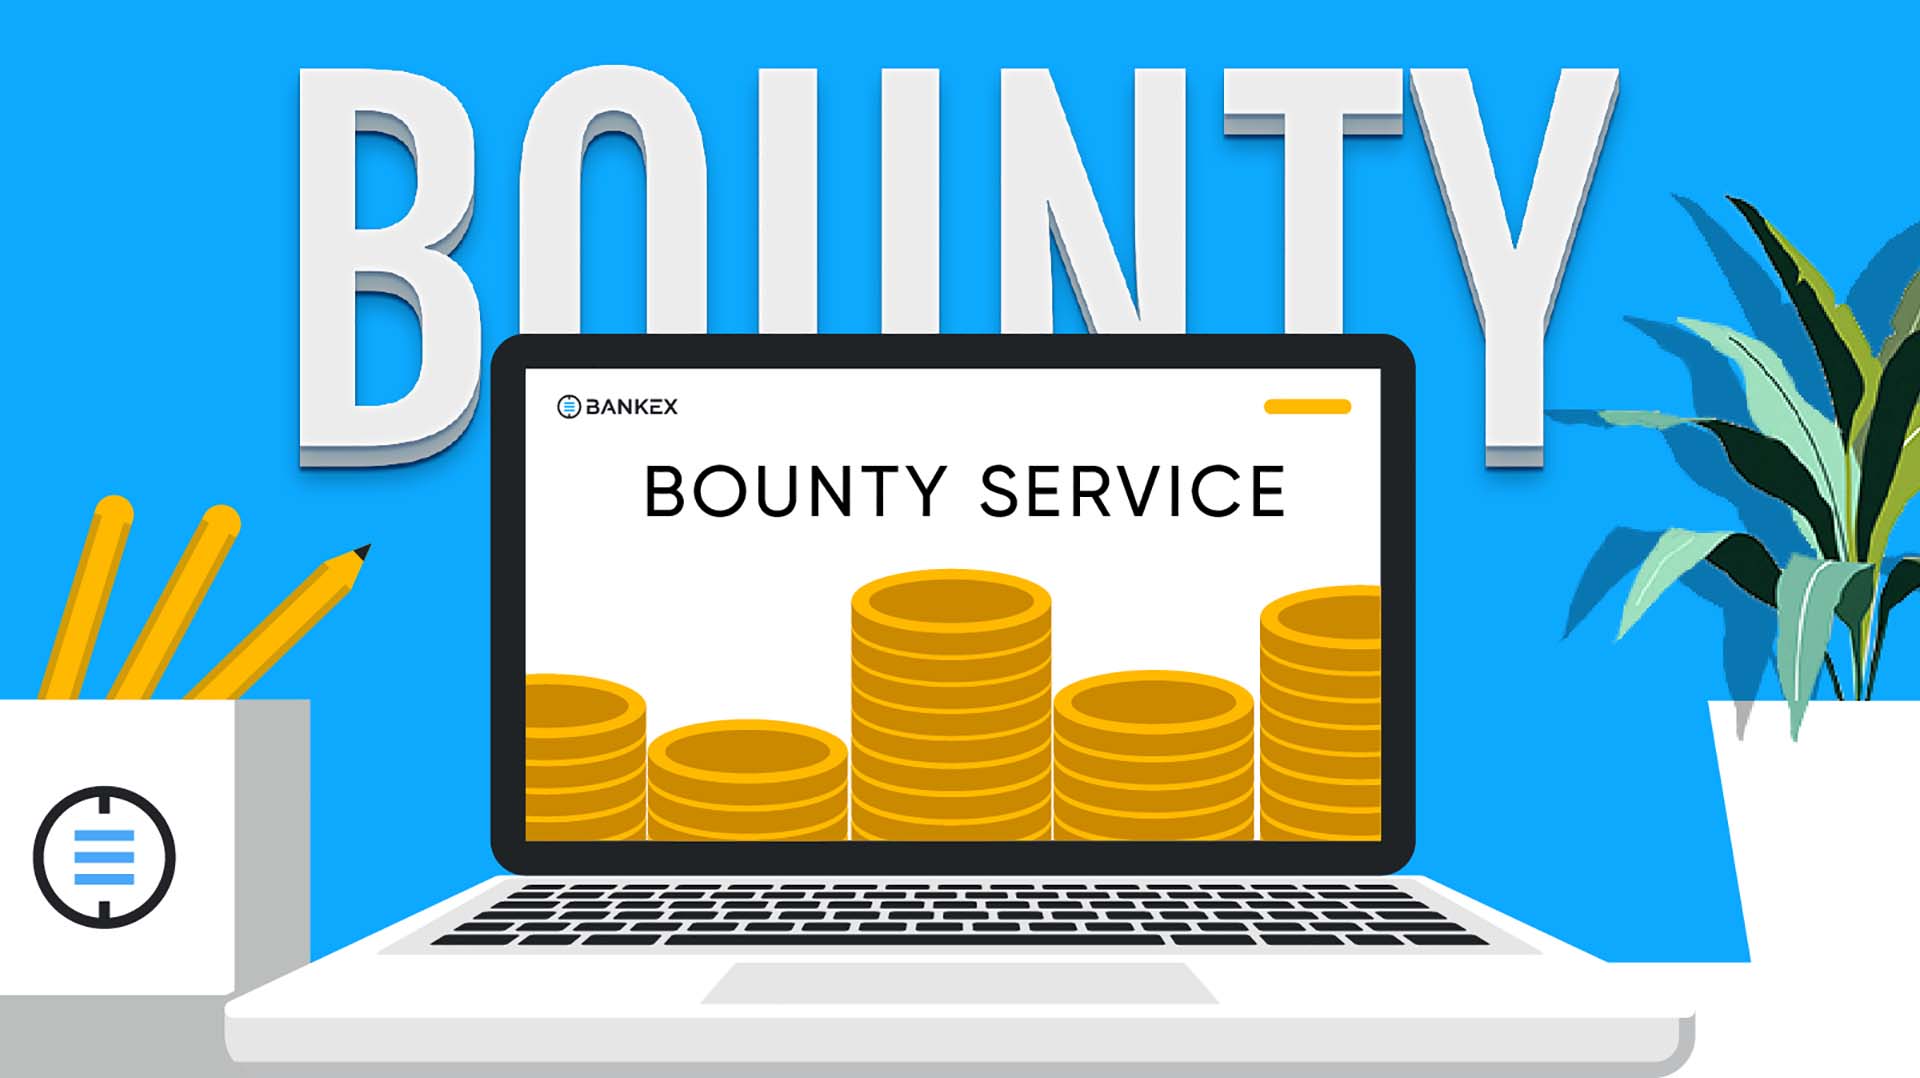 BANKEX Bounty Service to Disrupt Bounty and Airdrop Campaigns with Savings of up to 50%